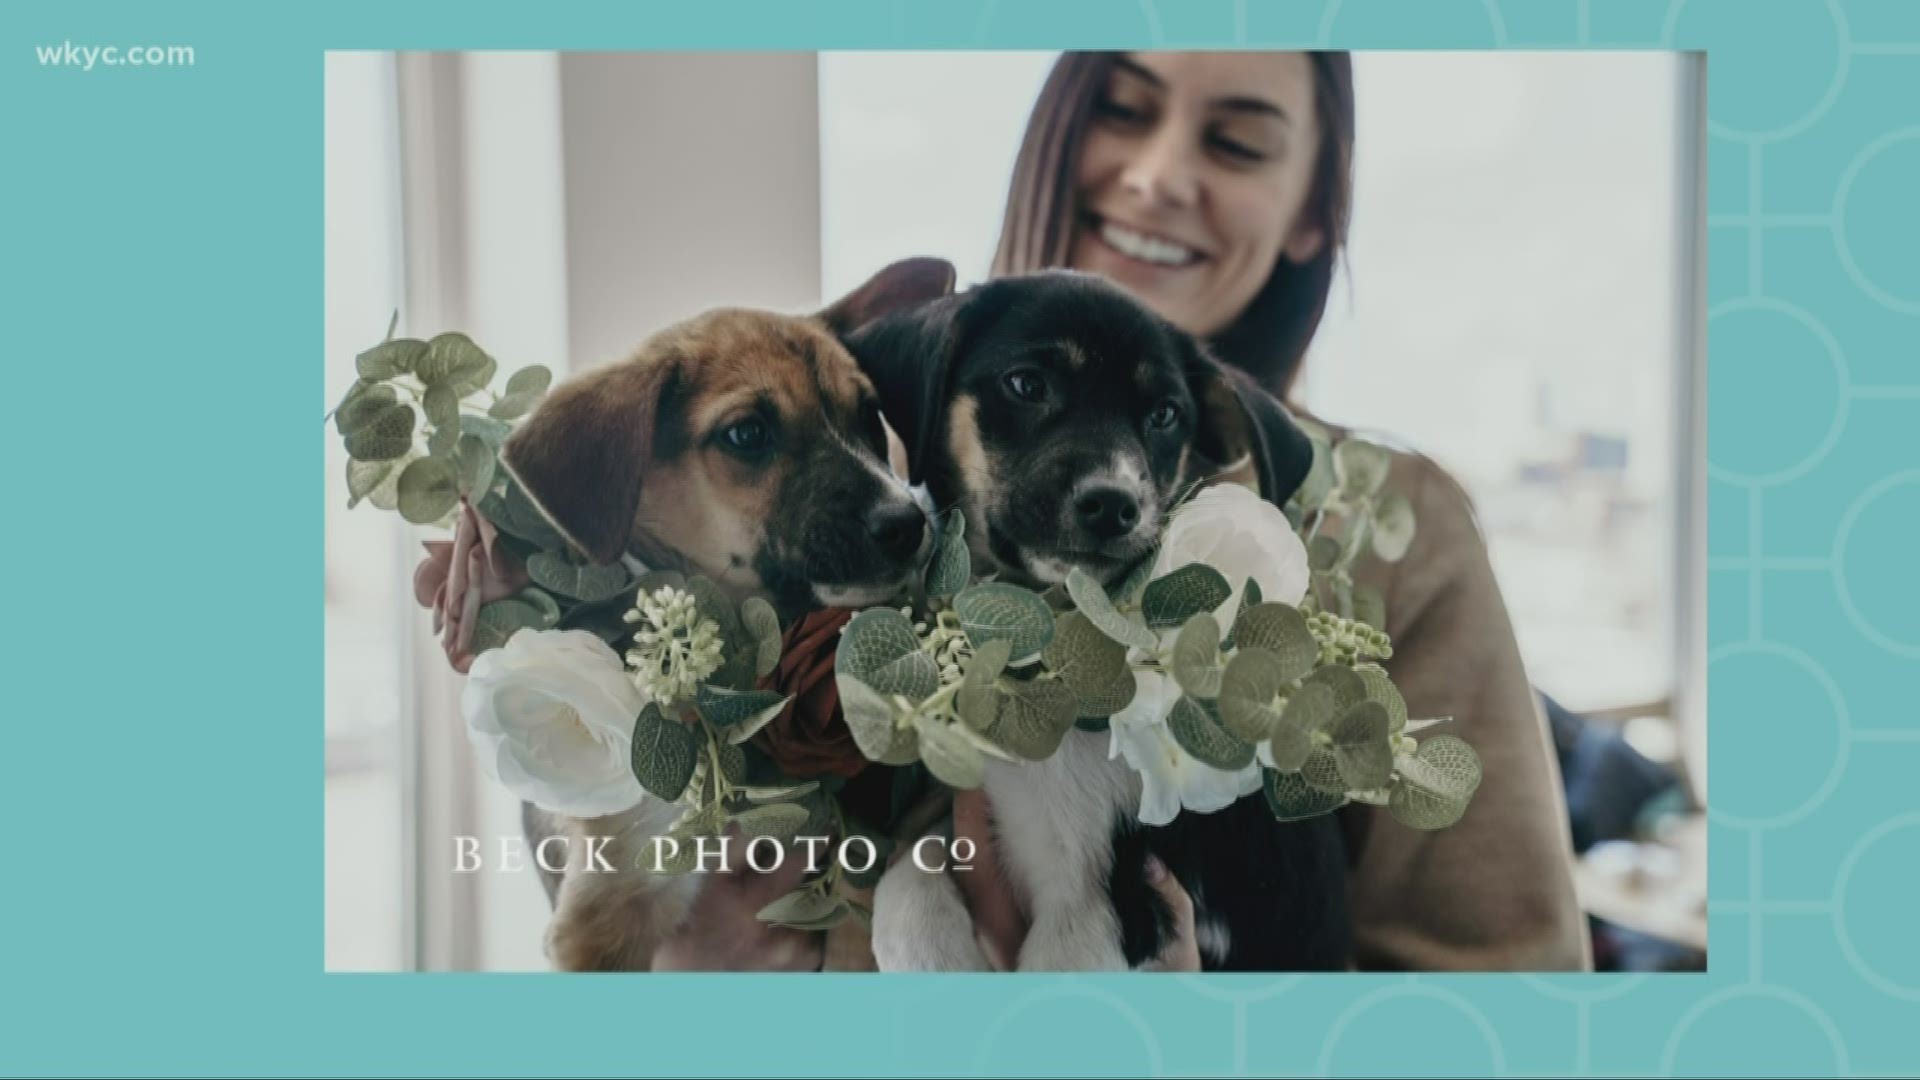 March 11, 2020: Puppy love! A couple in Northeast Ohio brings awareness to animal adoption by ditching traditional bridesmaid bouquets for adoptable puppies.